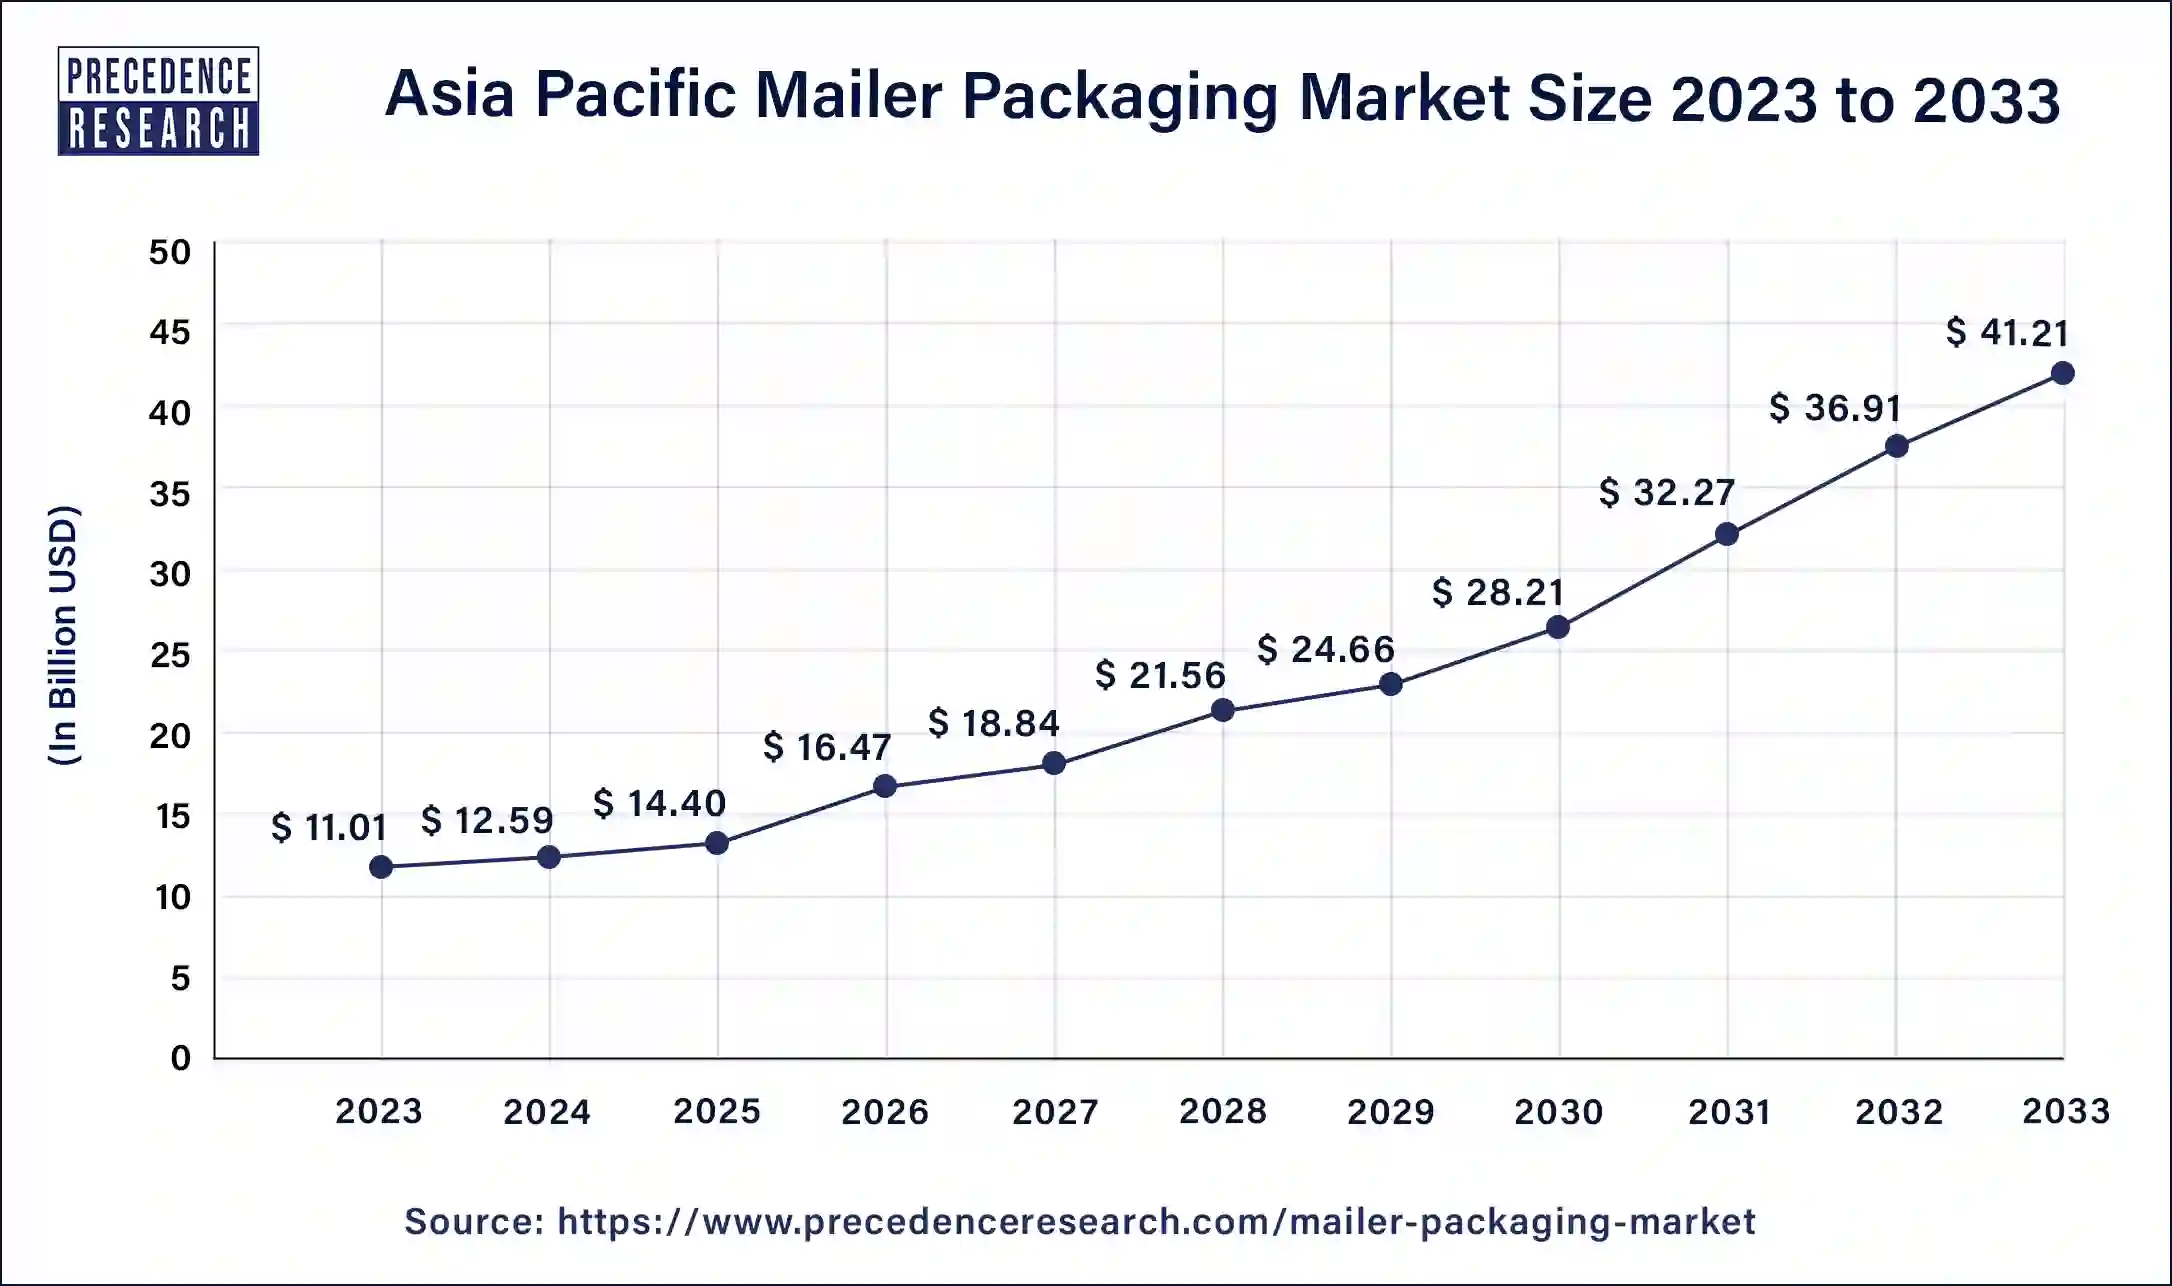 Asia Pacific Mailer Packaging Market Size 2024 to 2033